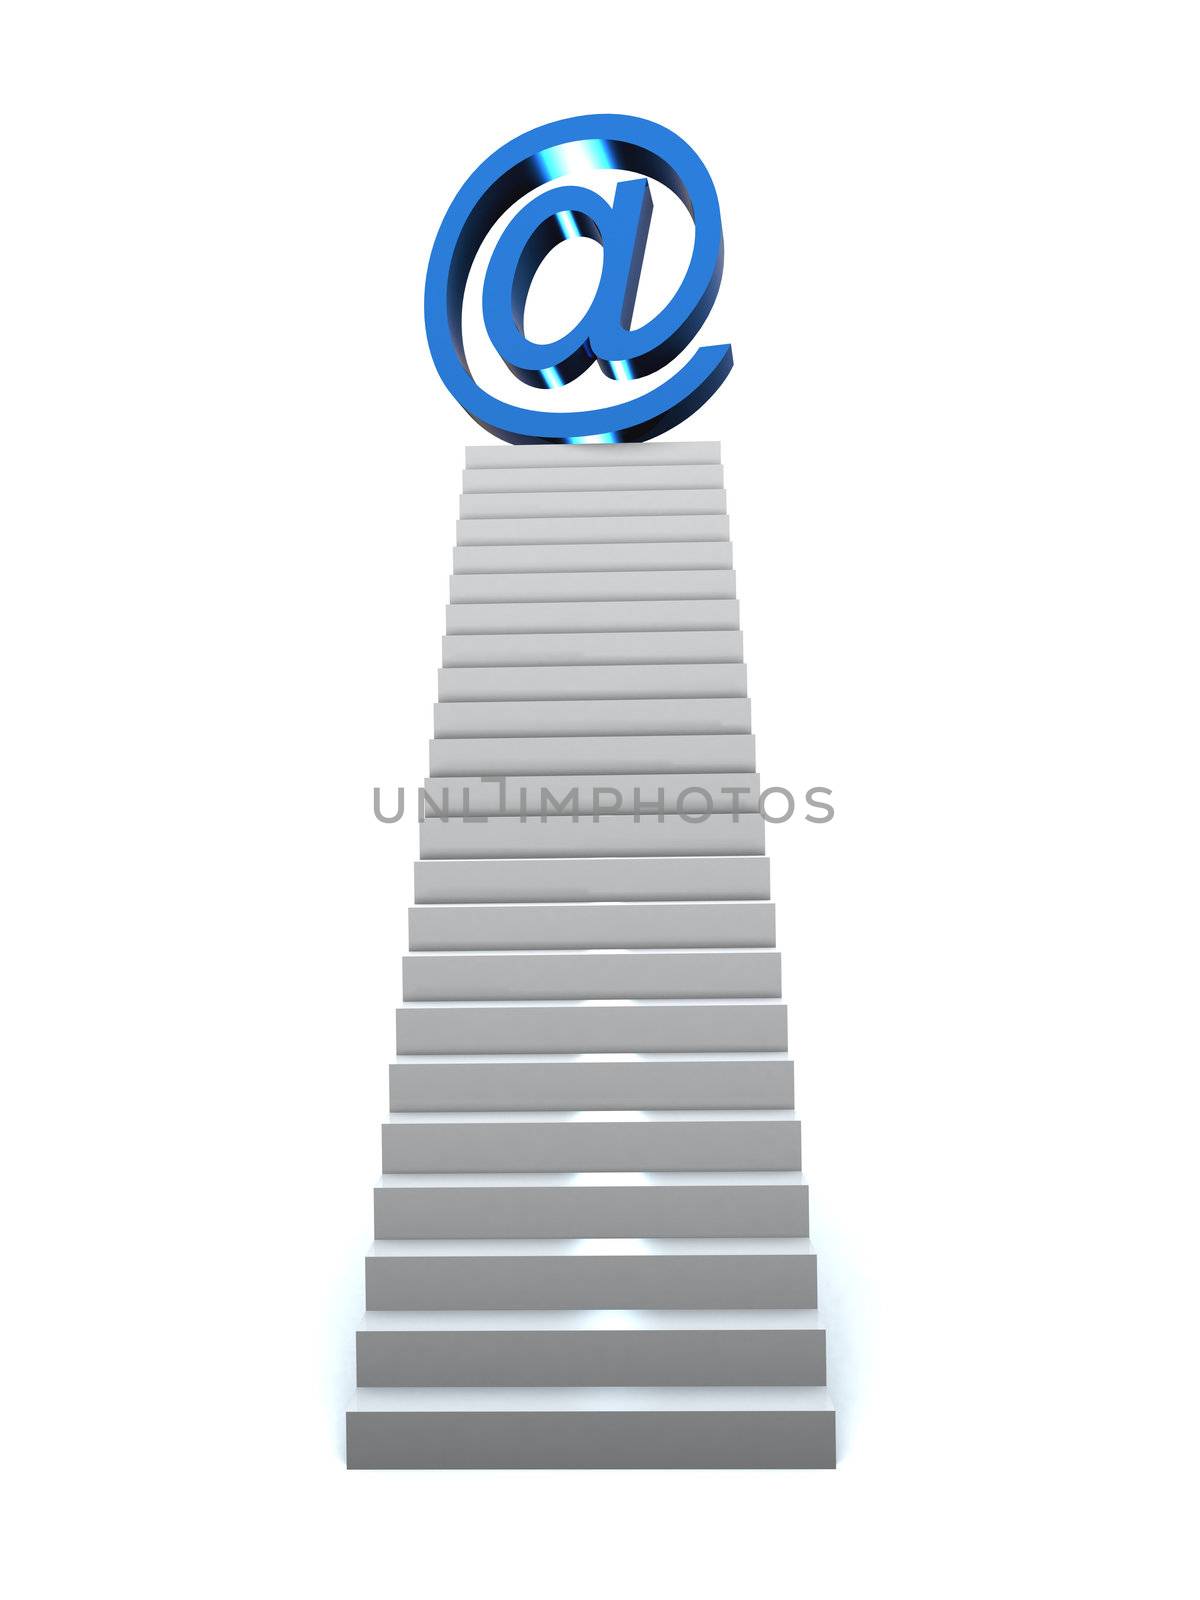 3D Staircase with at symbol upstairs illustration